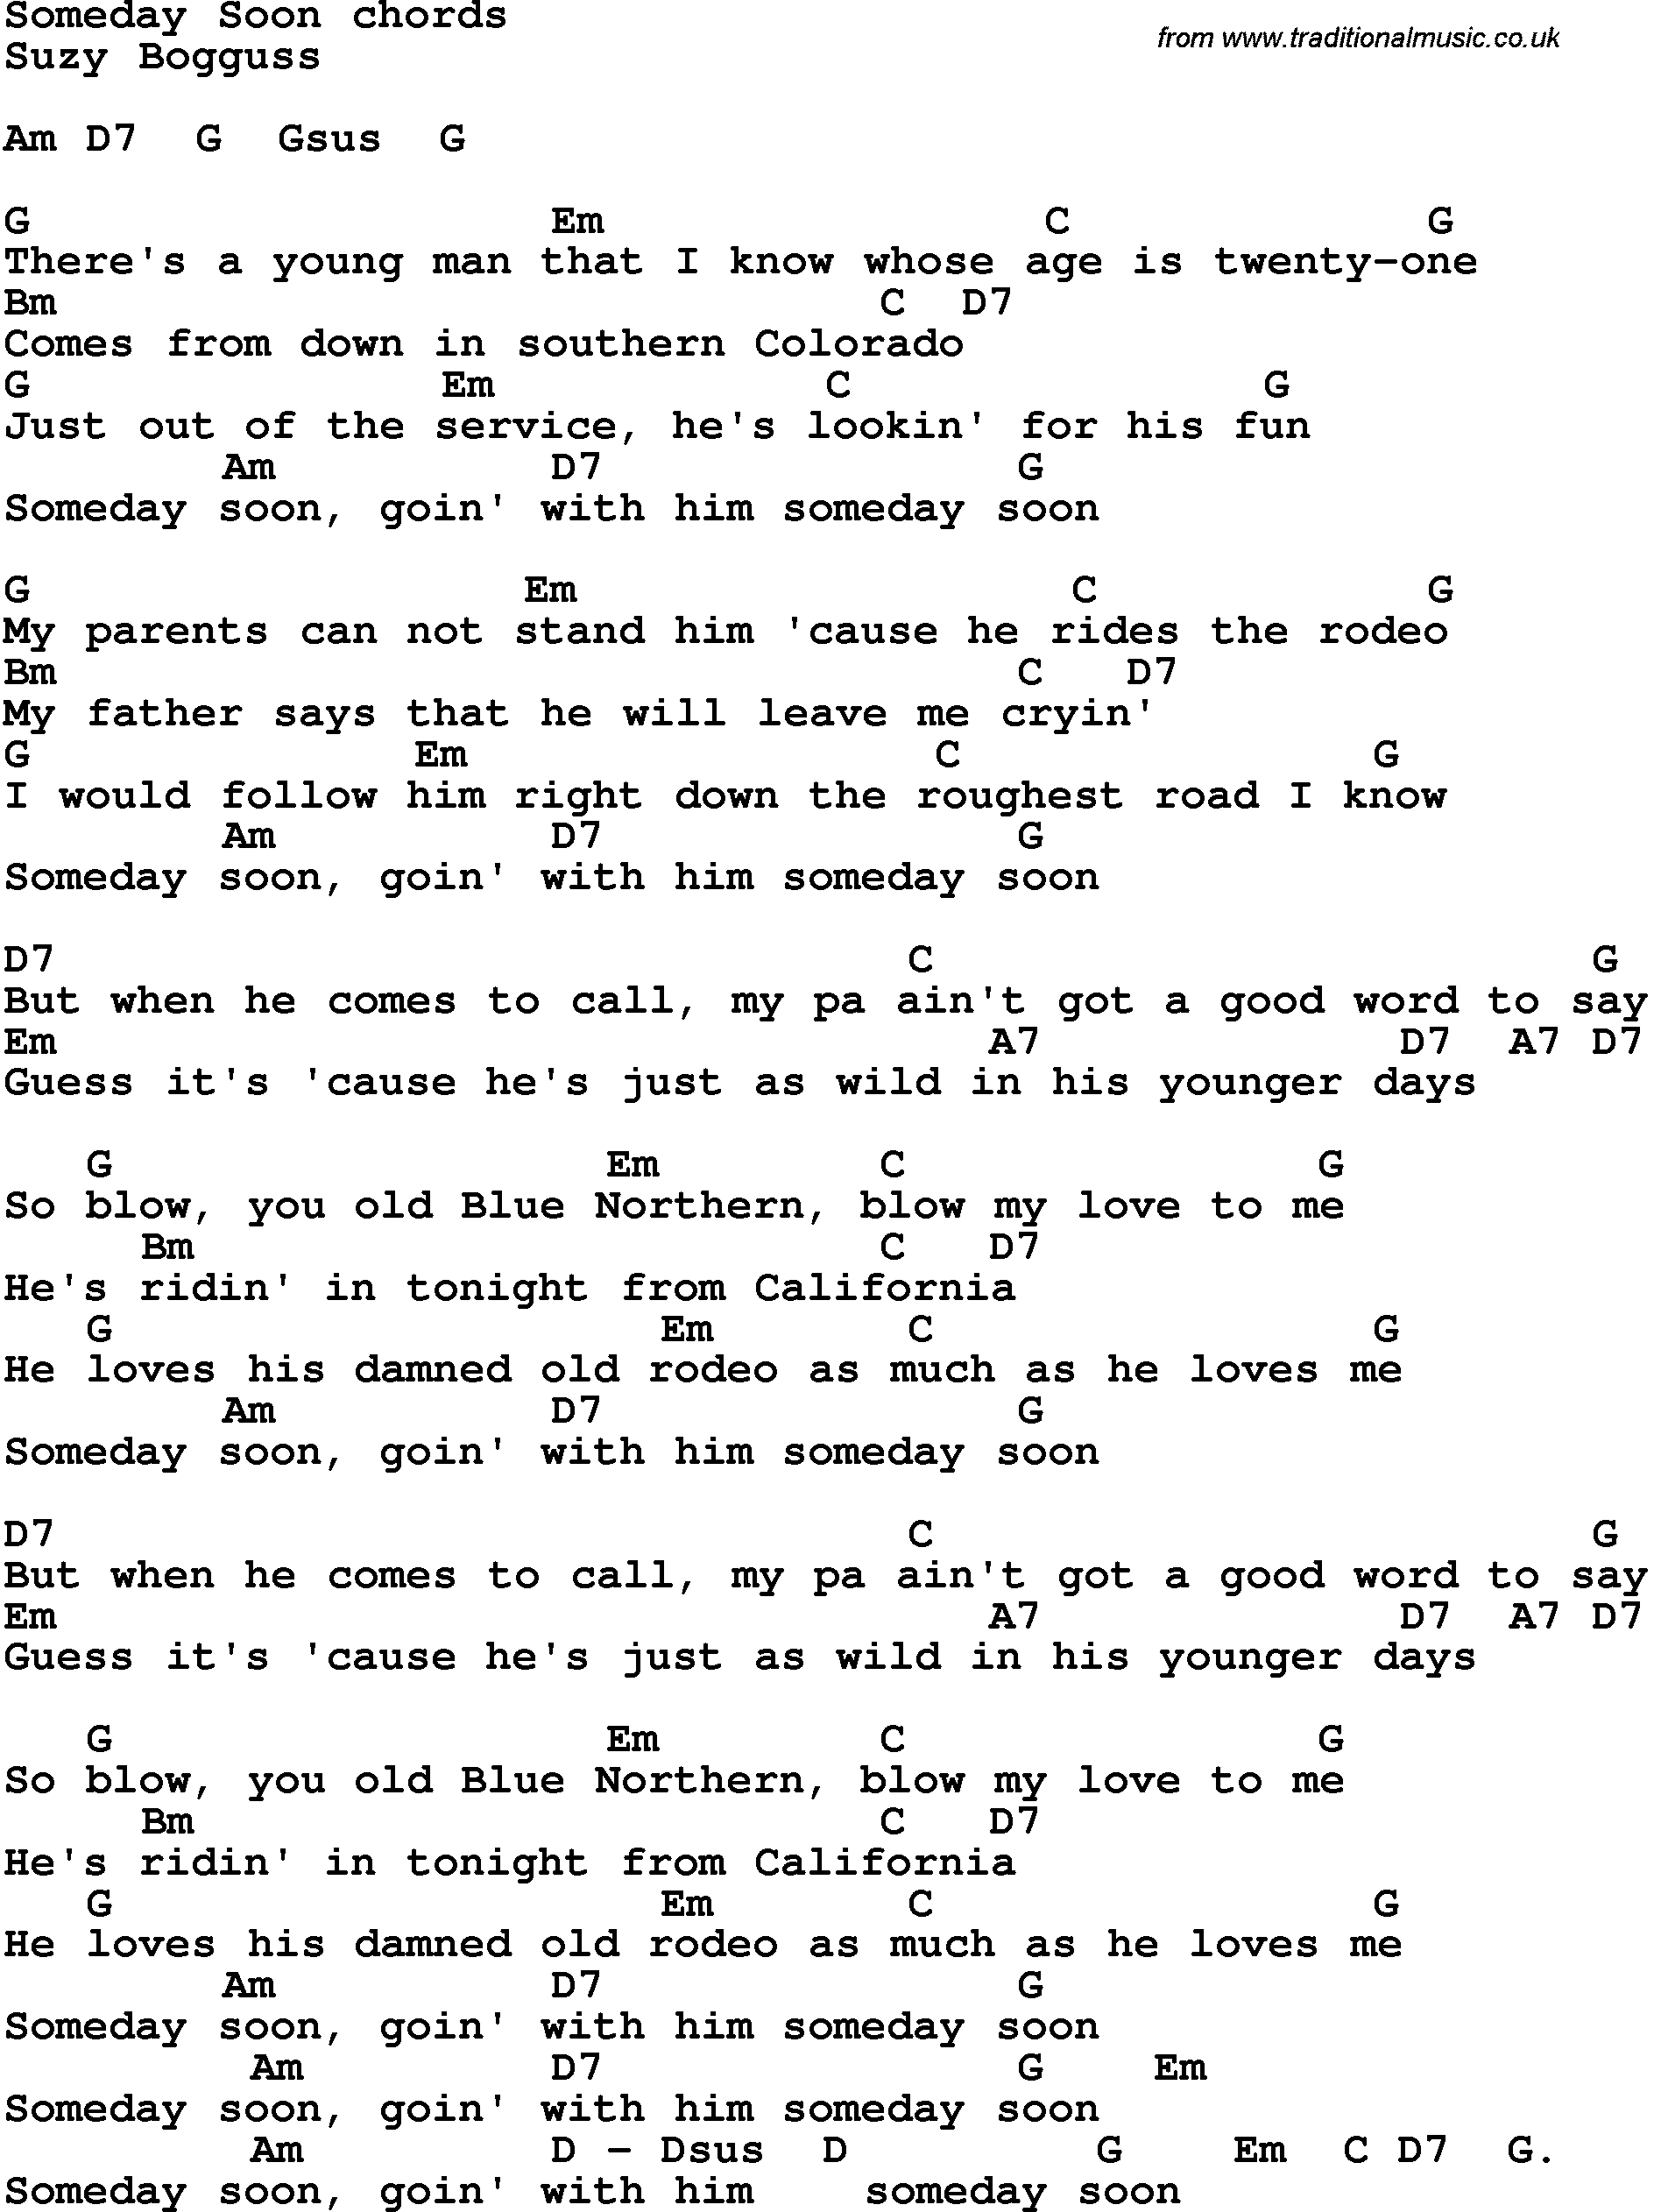 Song Lyrics with guitar chords for Someday Soon